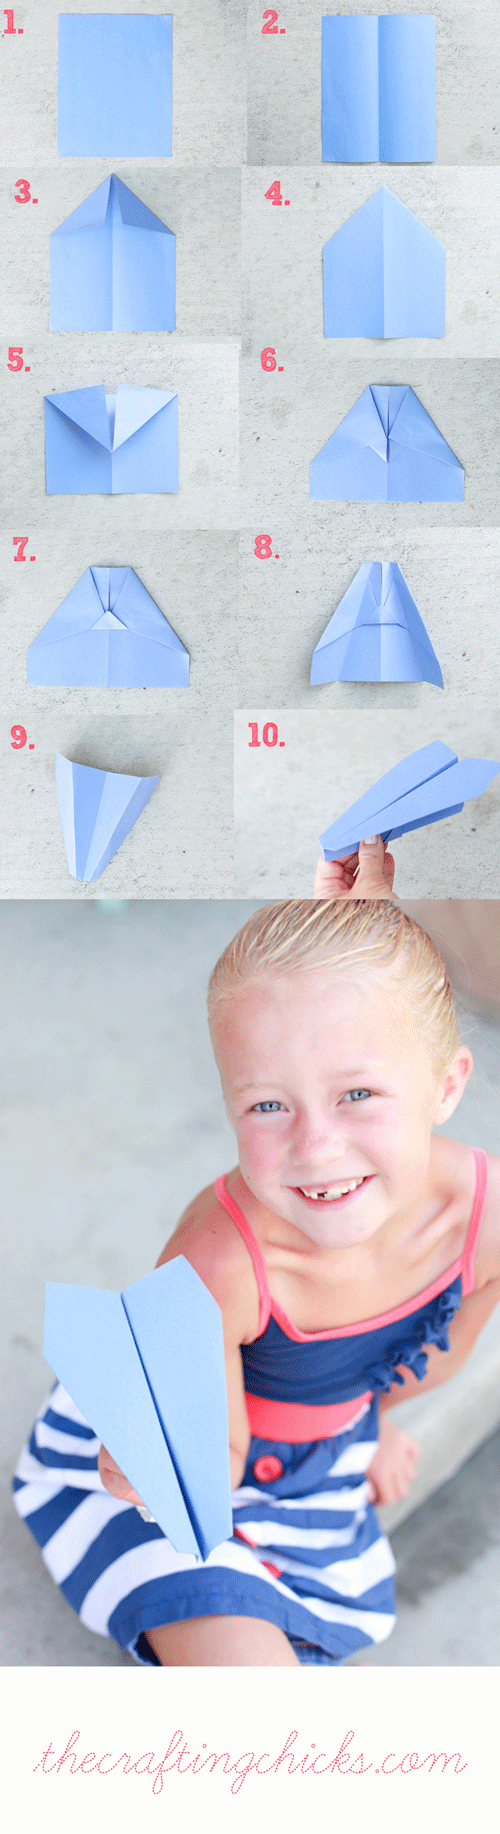 one paper airplane every kid should know how to make